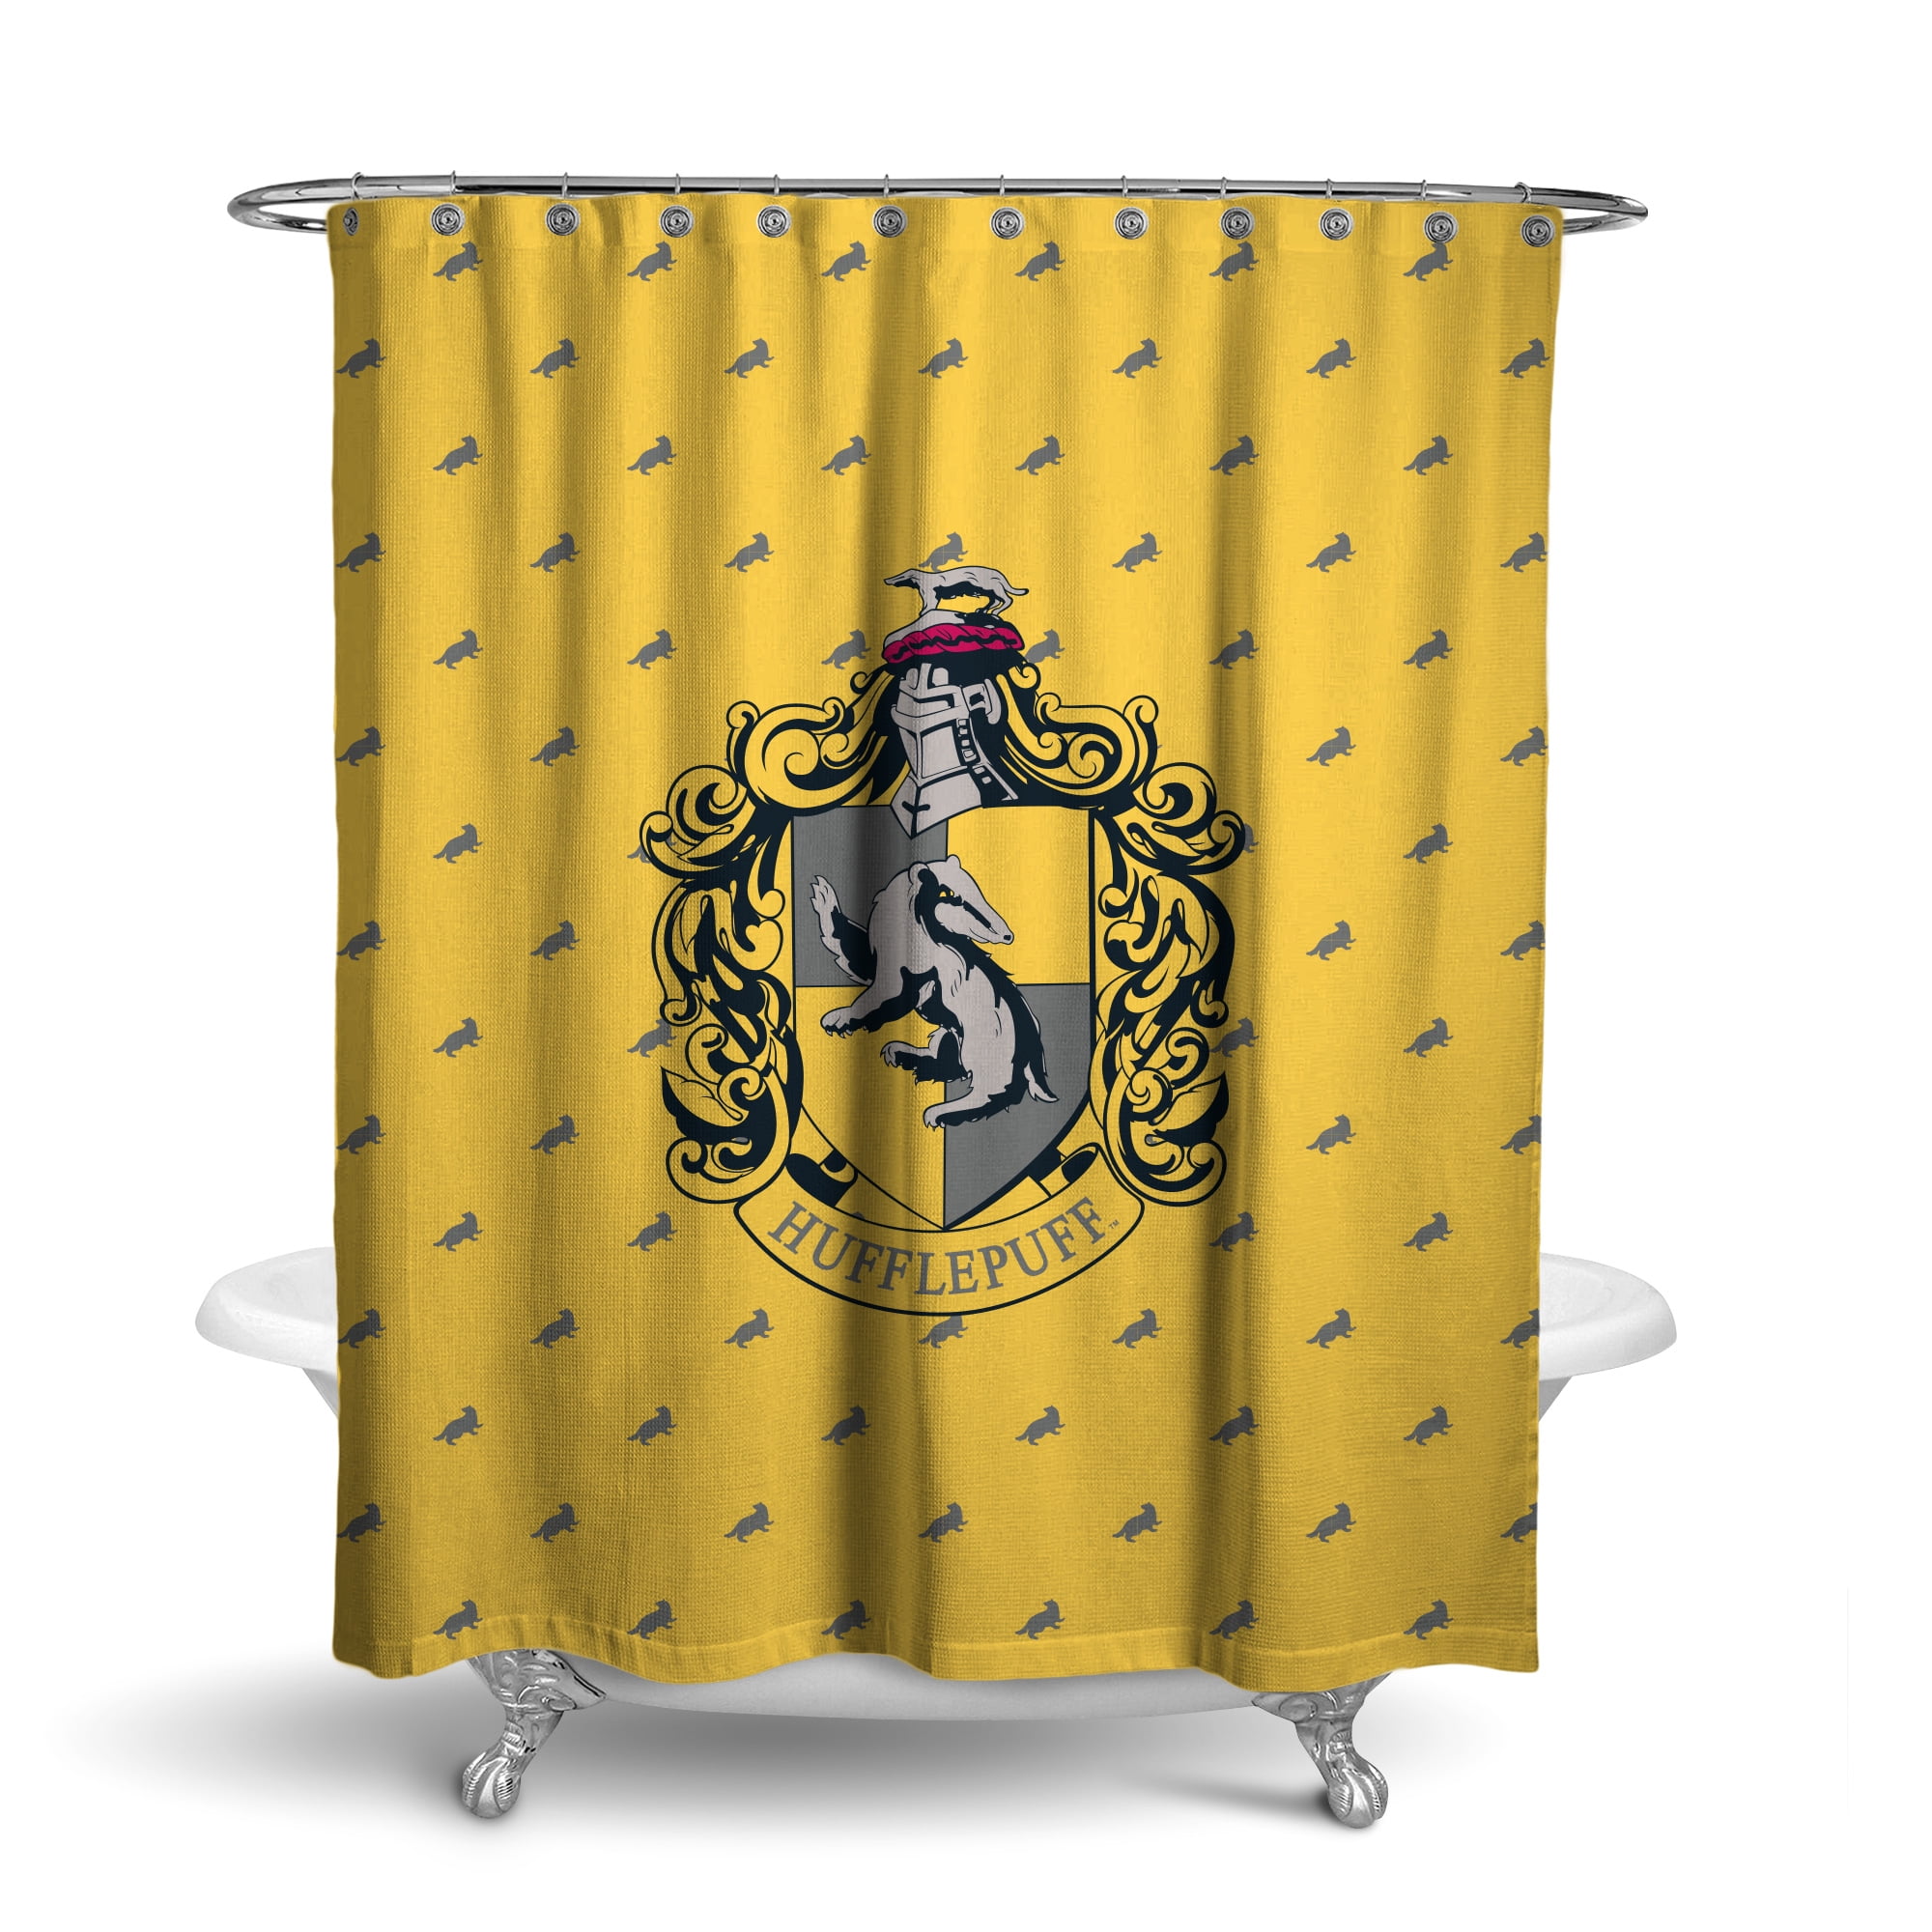 Harry Potter Printed Fabric Waterproof Bathroom Shower Curtain Accessory Set 